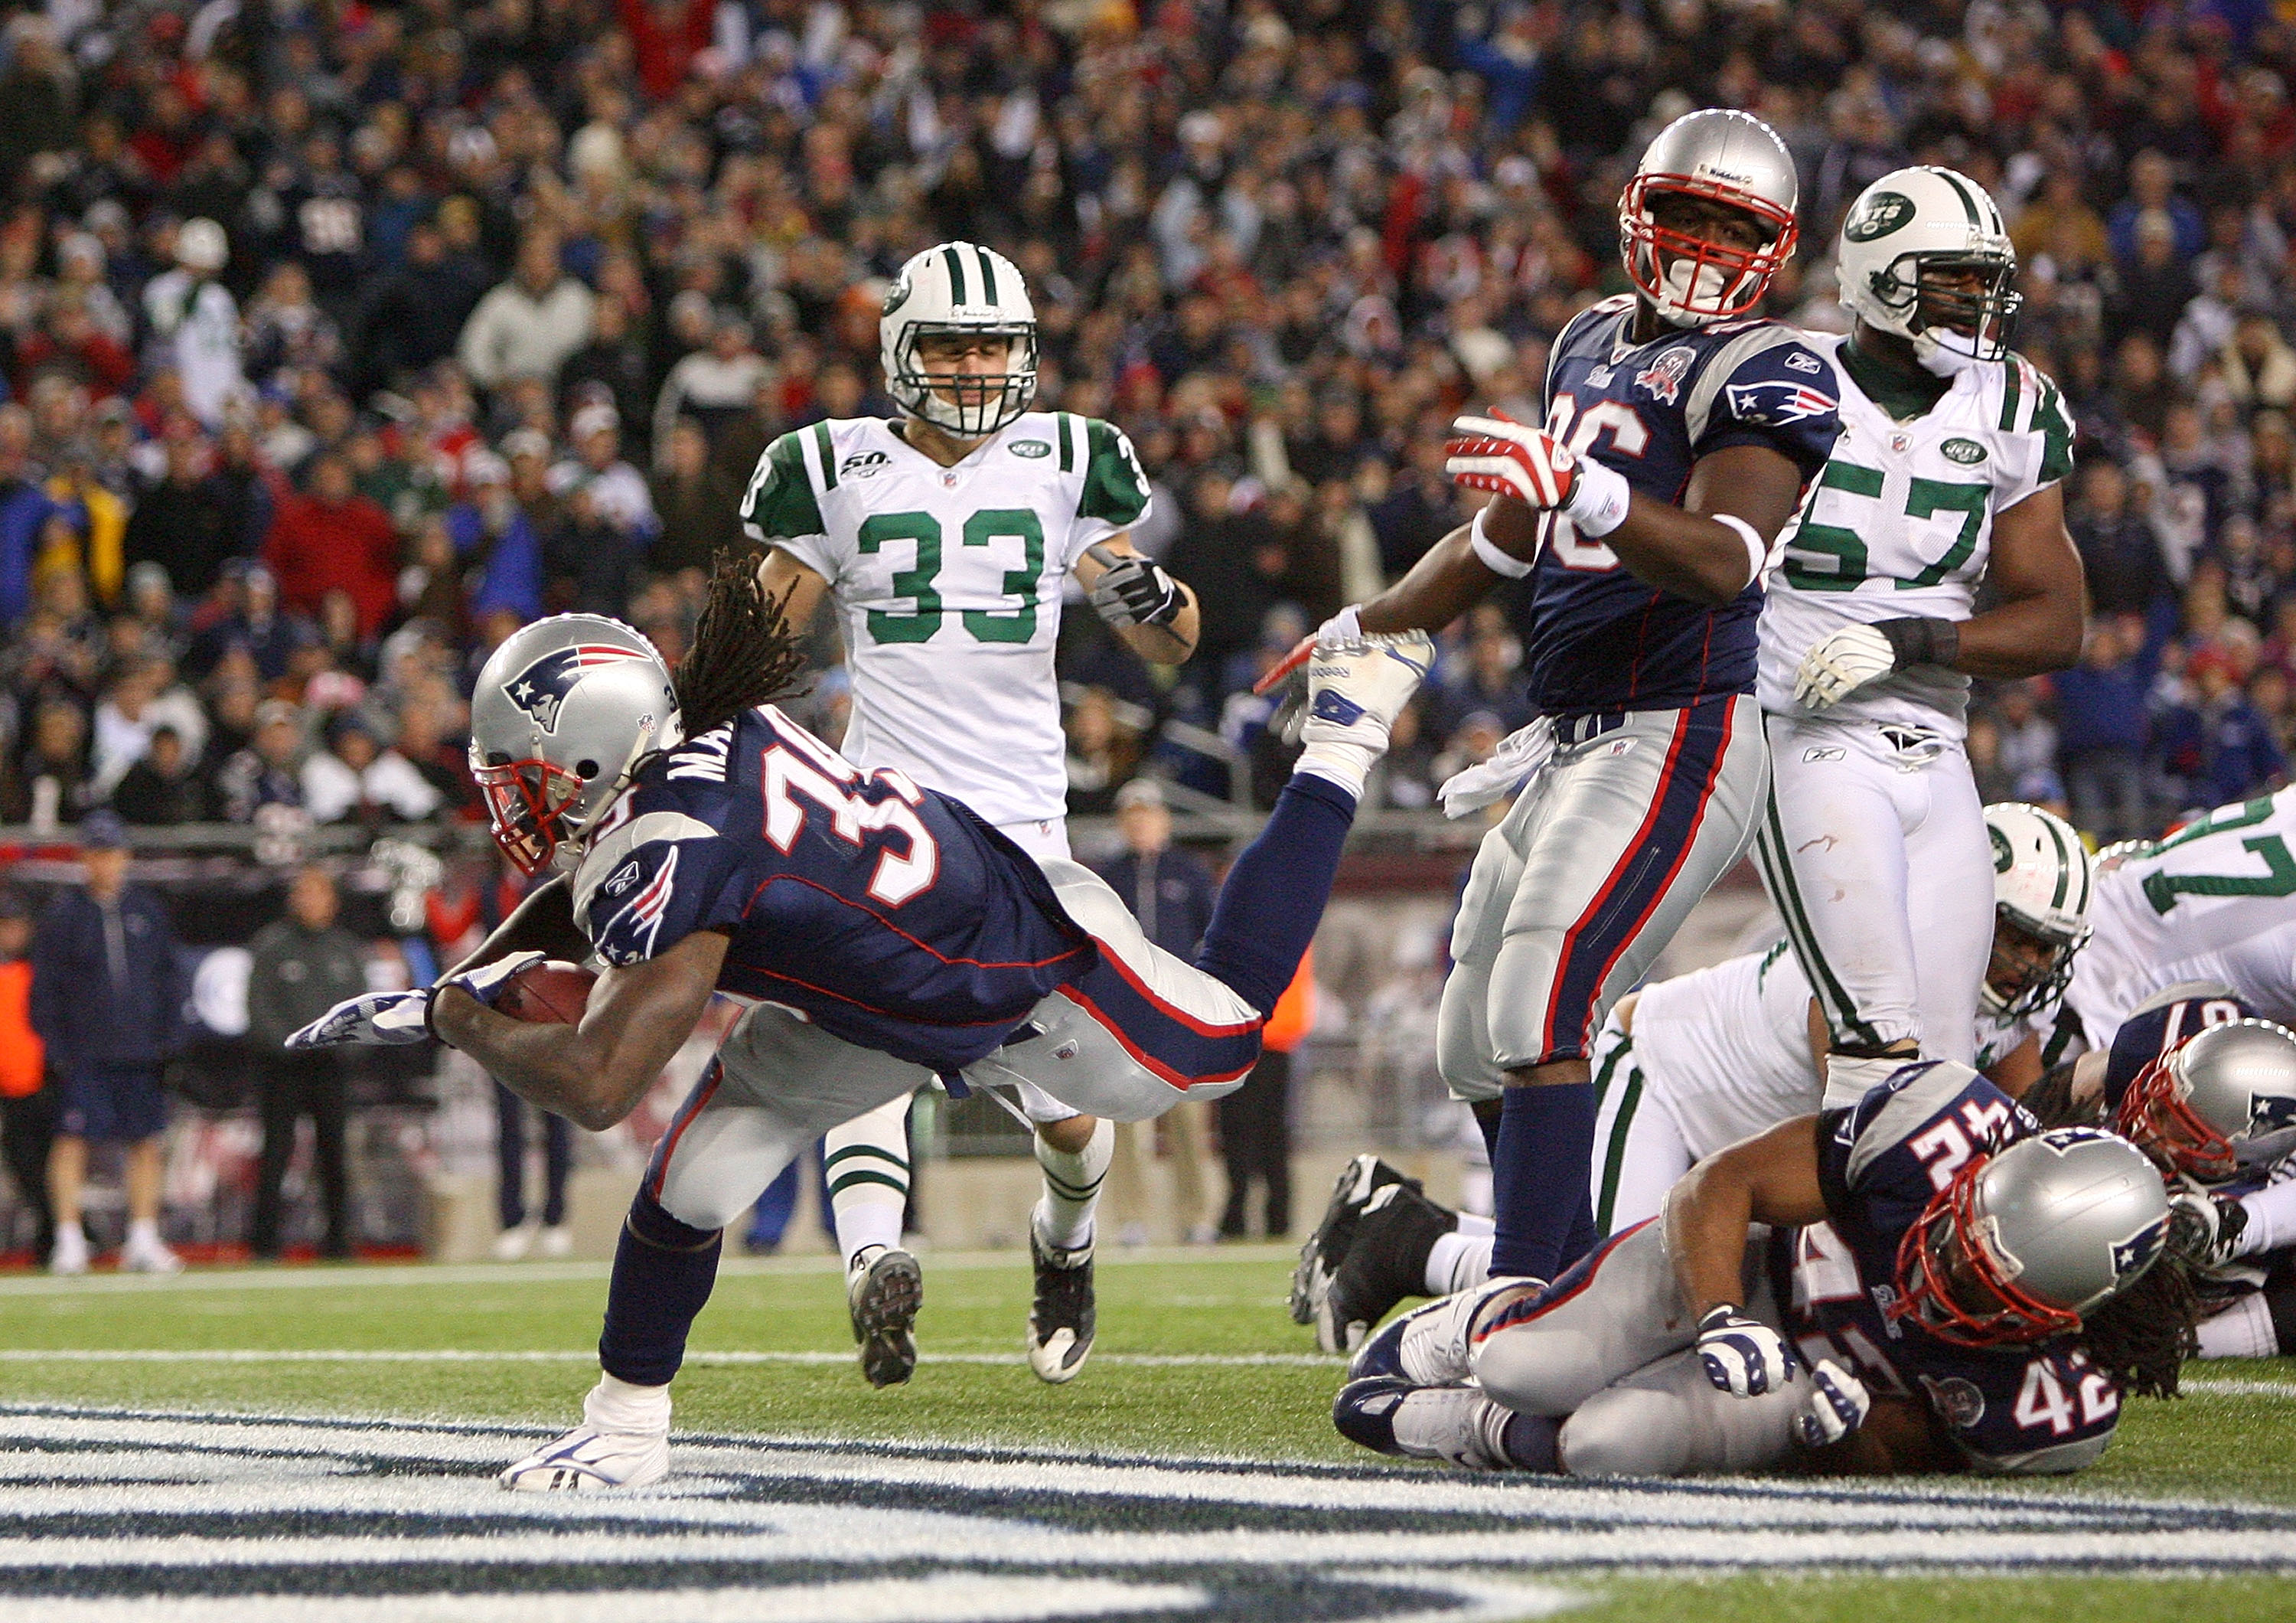 FOXBORO, MA - NOVEMBER 22: Laurence Maroney #39 of the New England Patriots scores a touchdown in the fourth quarter during a game against the New York Jets at Gillette Stadium on November 22, 2009 in Foxboro, Massachusetts. (Photo by Jim Rogash/Getty Ima